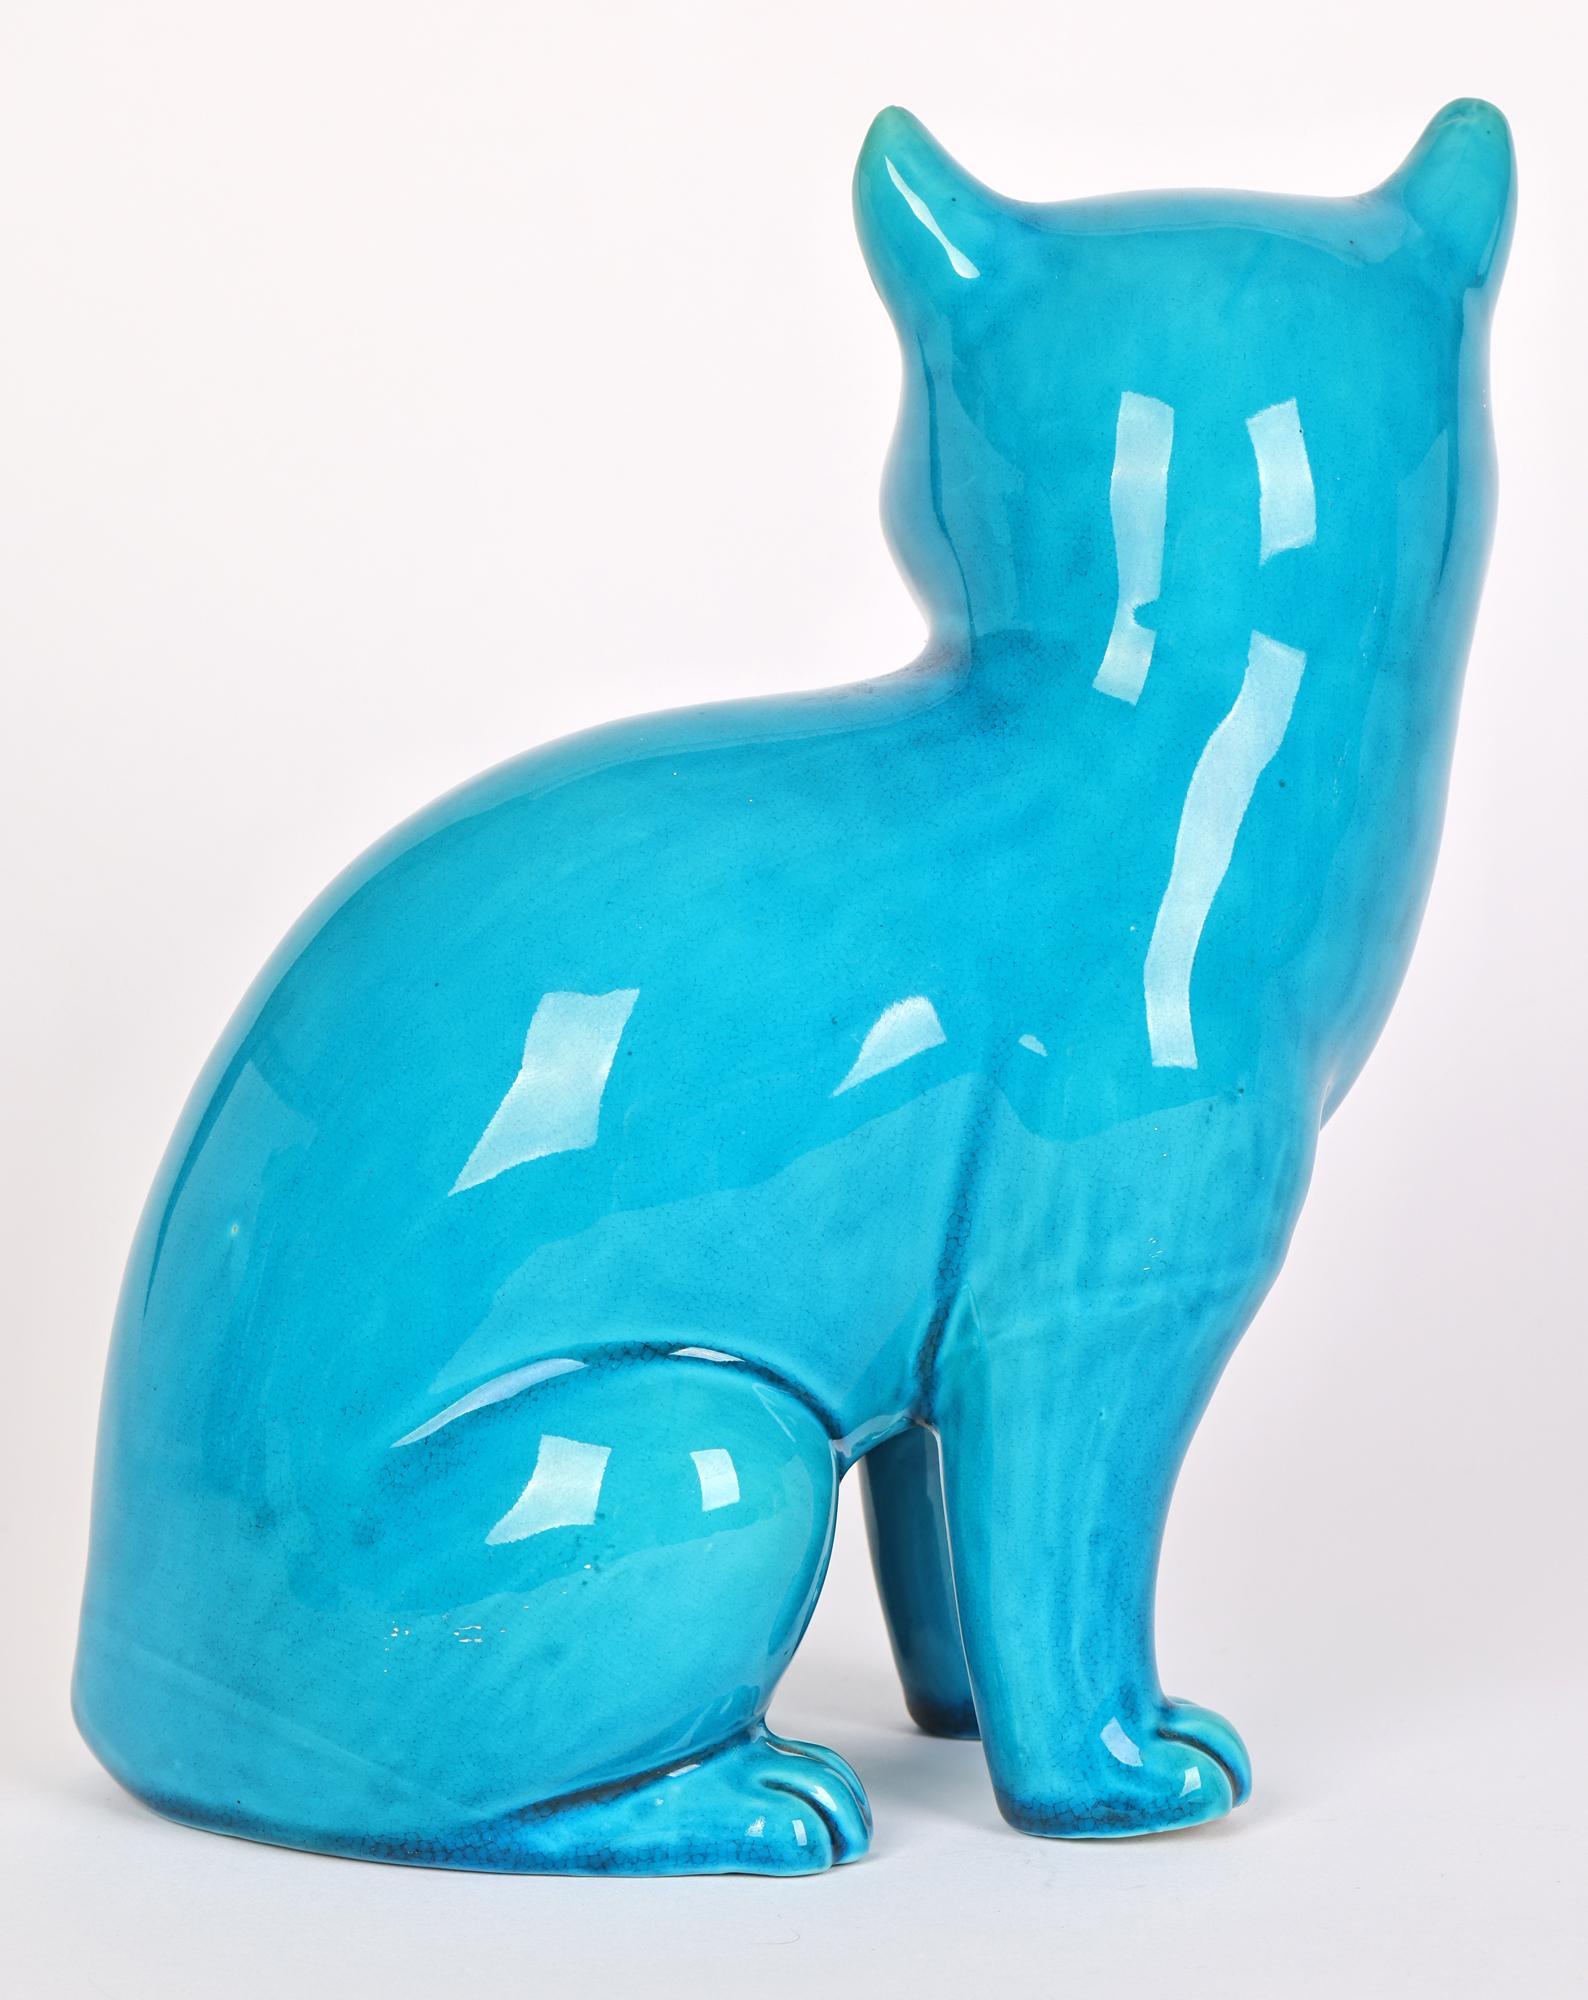 Early 20th Century Chinese Turquoise Glazed Porcelain Seated Cat Figure   